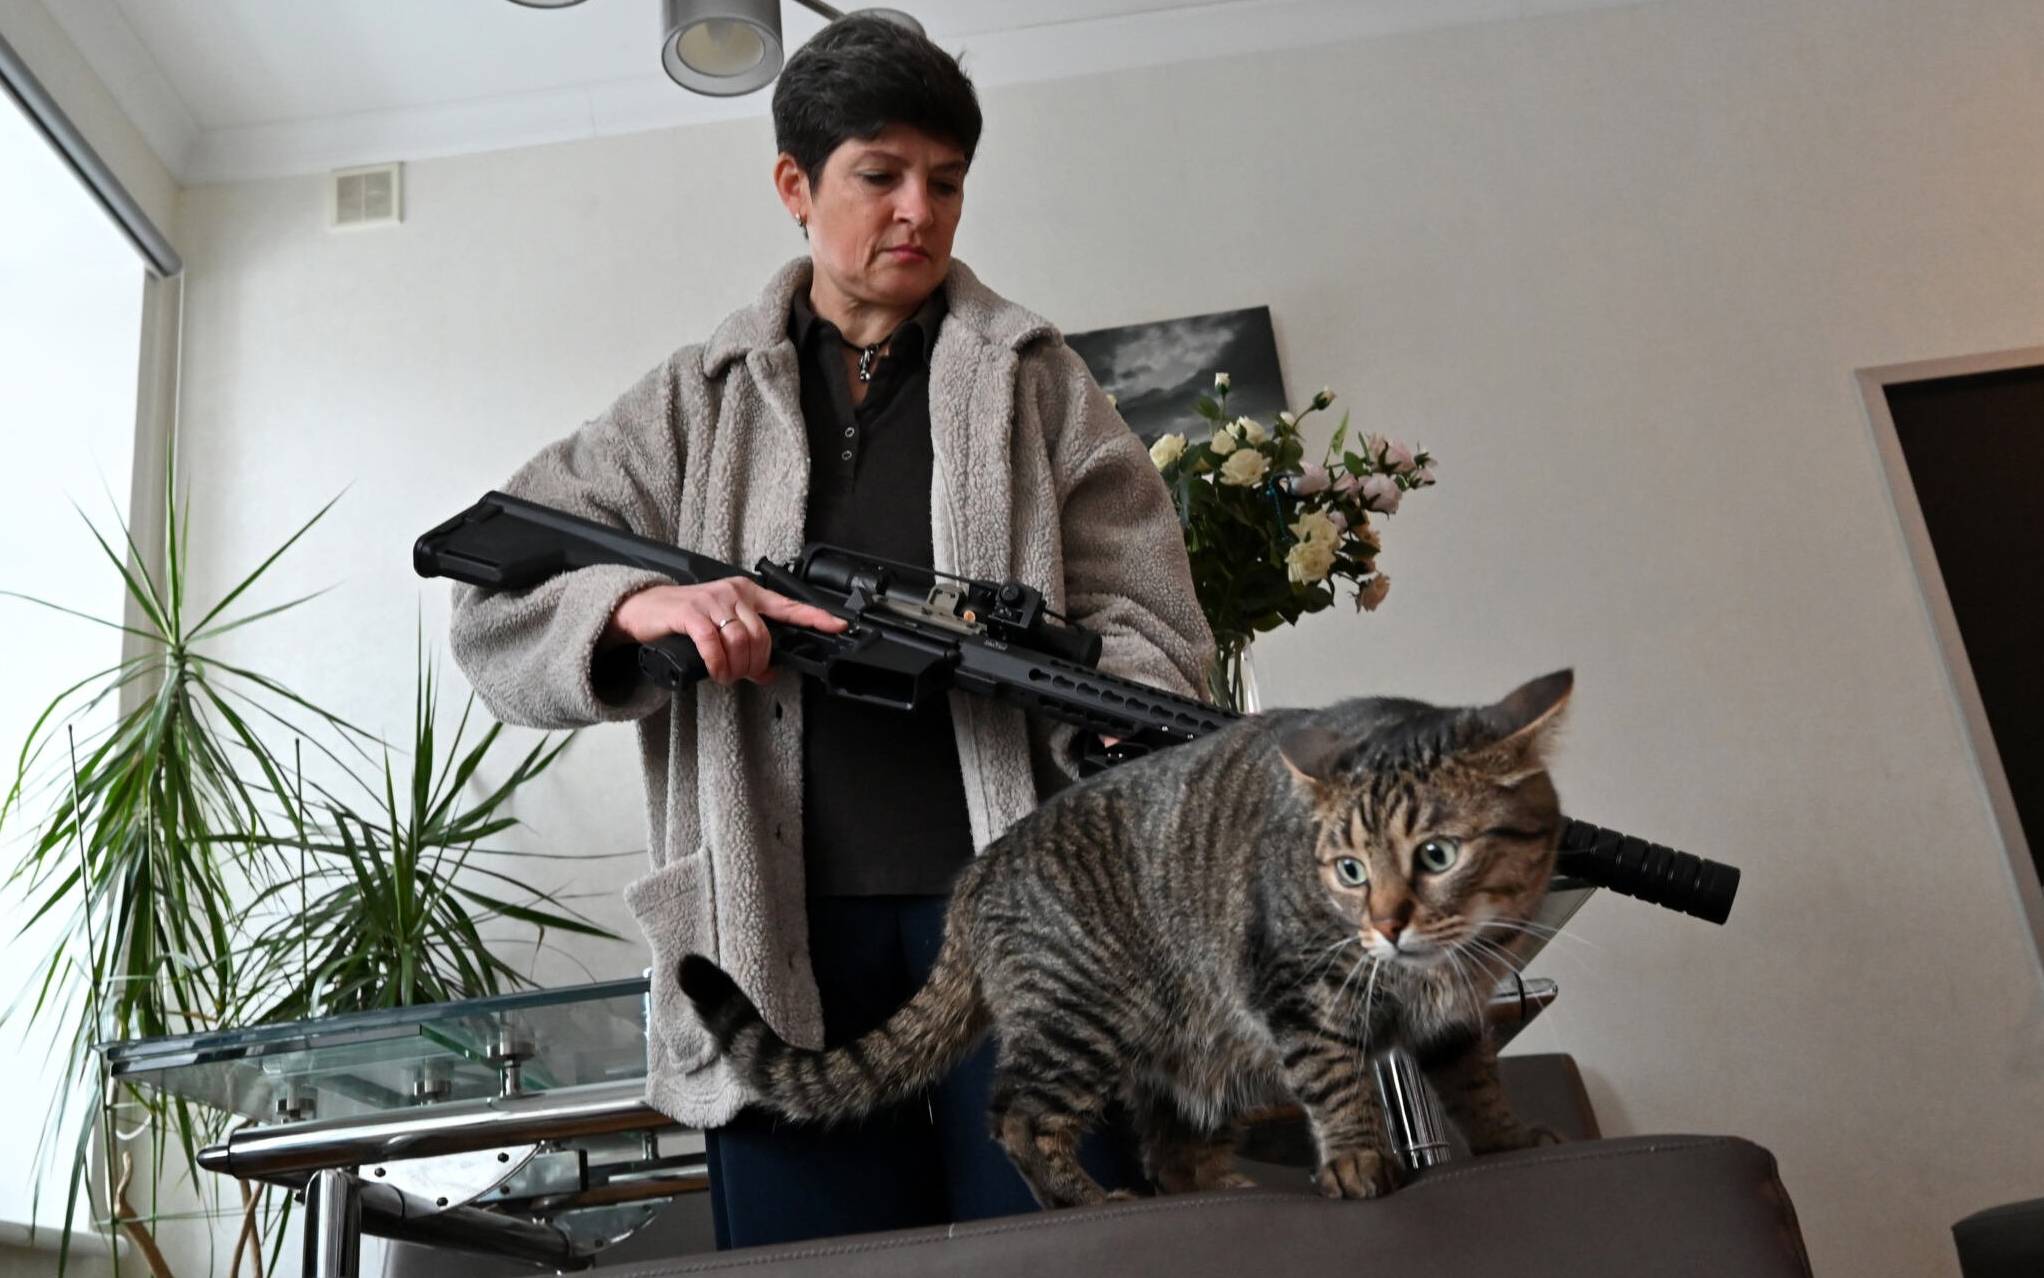 Mariana Jaglo, mother-of-three, talks on the phone as she holds her Ukrainian Z-15 - Zbroyar long rifle during an interview in the kitchen of her  flat in Kiev on January 28, 2022. - As fears grow of a potential invasion by Russian troops massed on Ukraine's border, this 52-year-old army reservist, insists in her willing to fight to defend her country. (Photo by Sergei SUPINSKY / AFP)